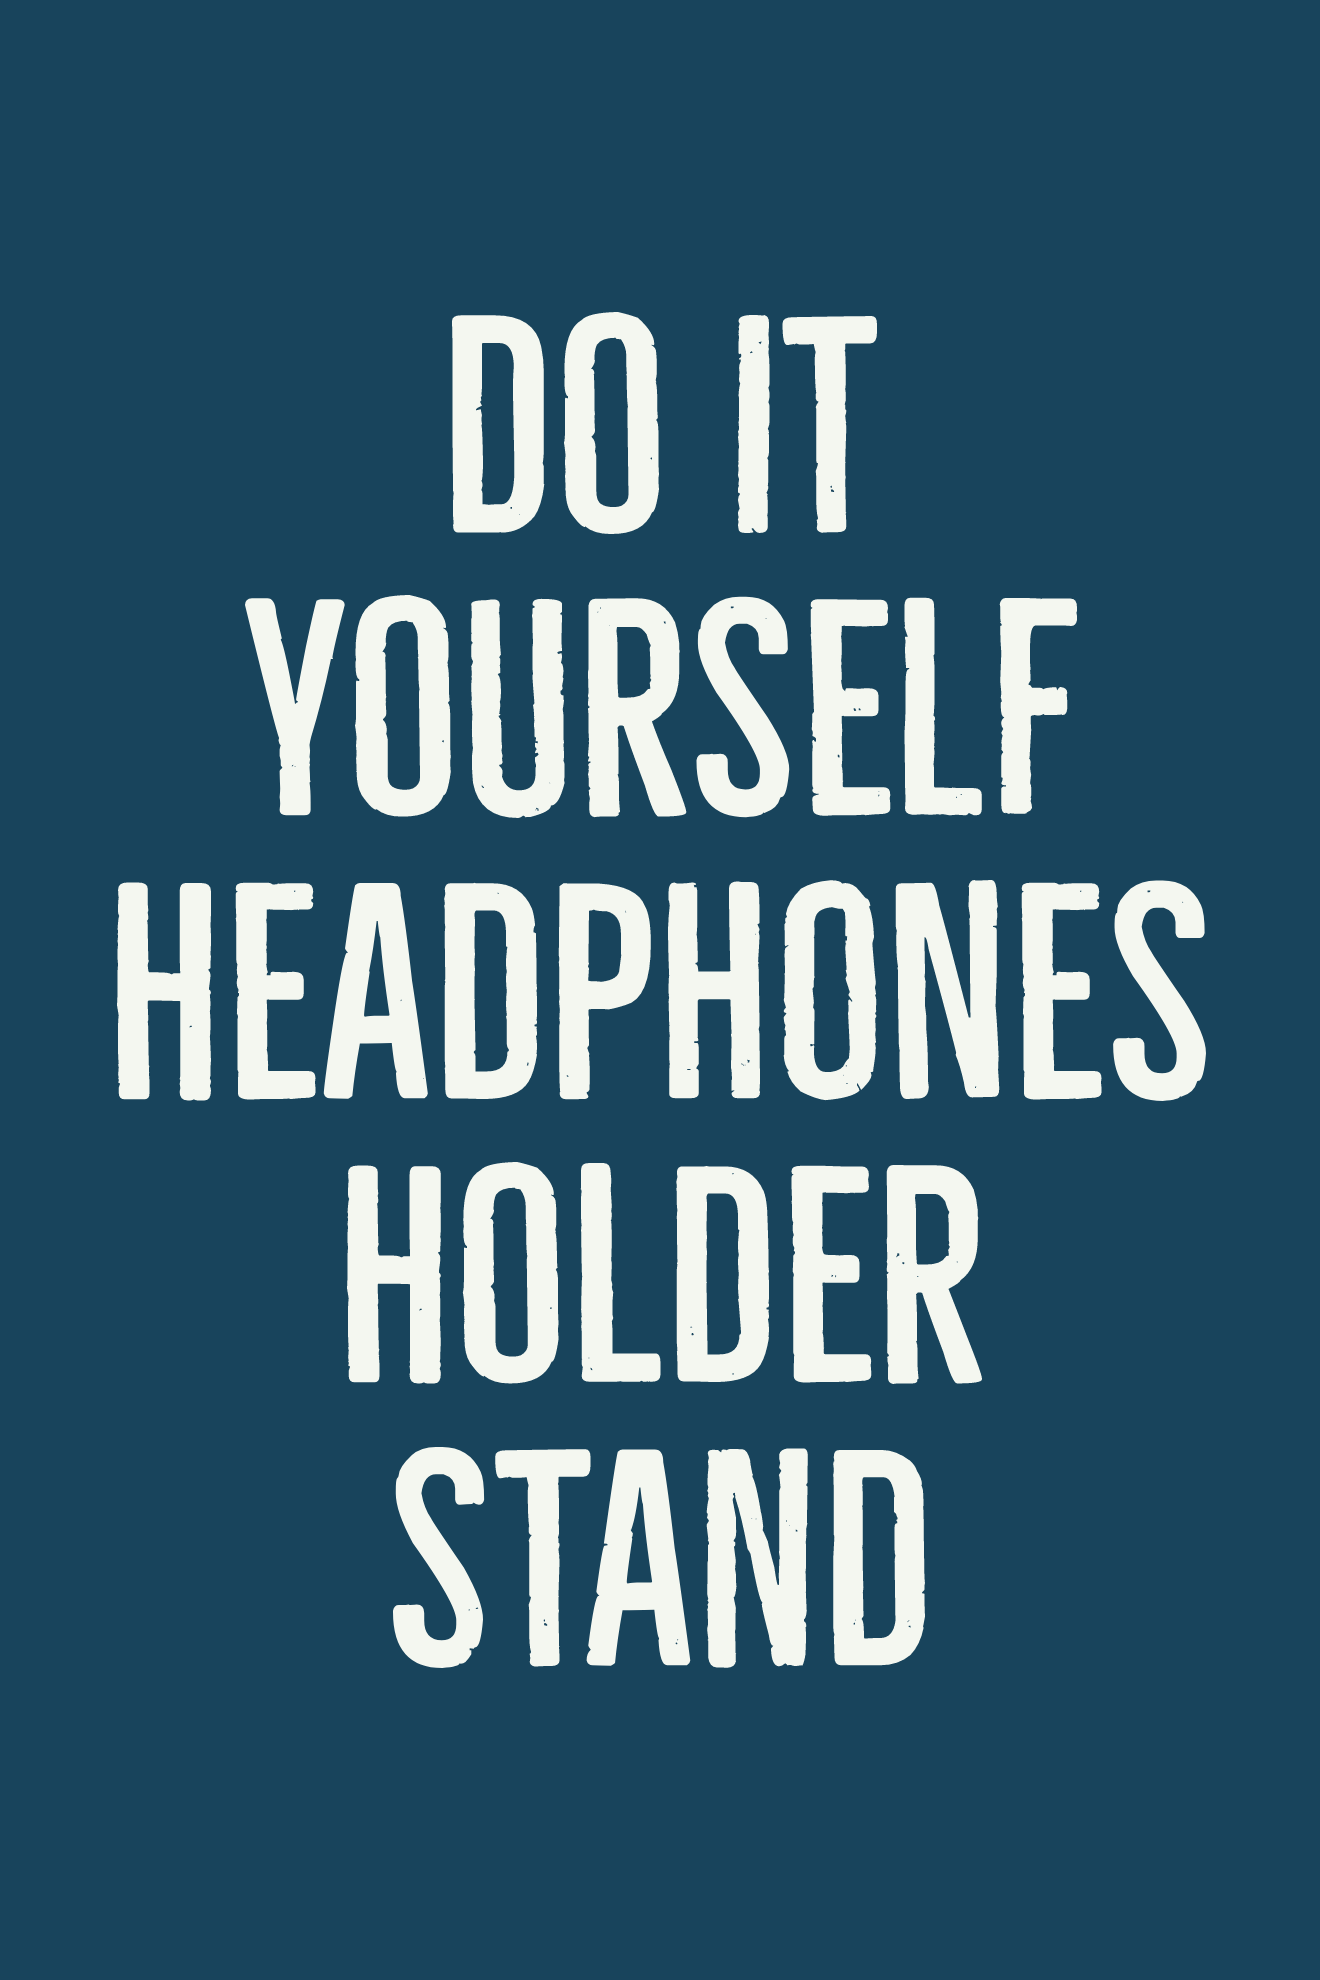 Do it Yourself headphones holder stand